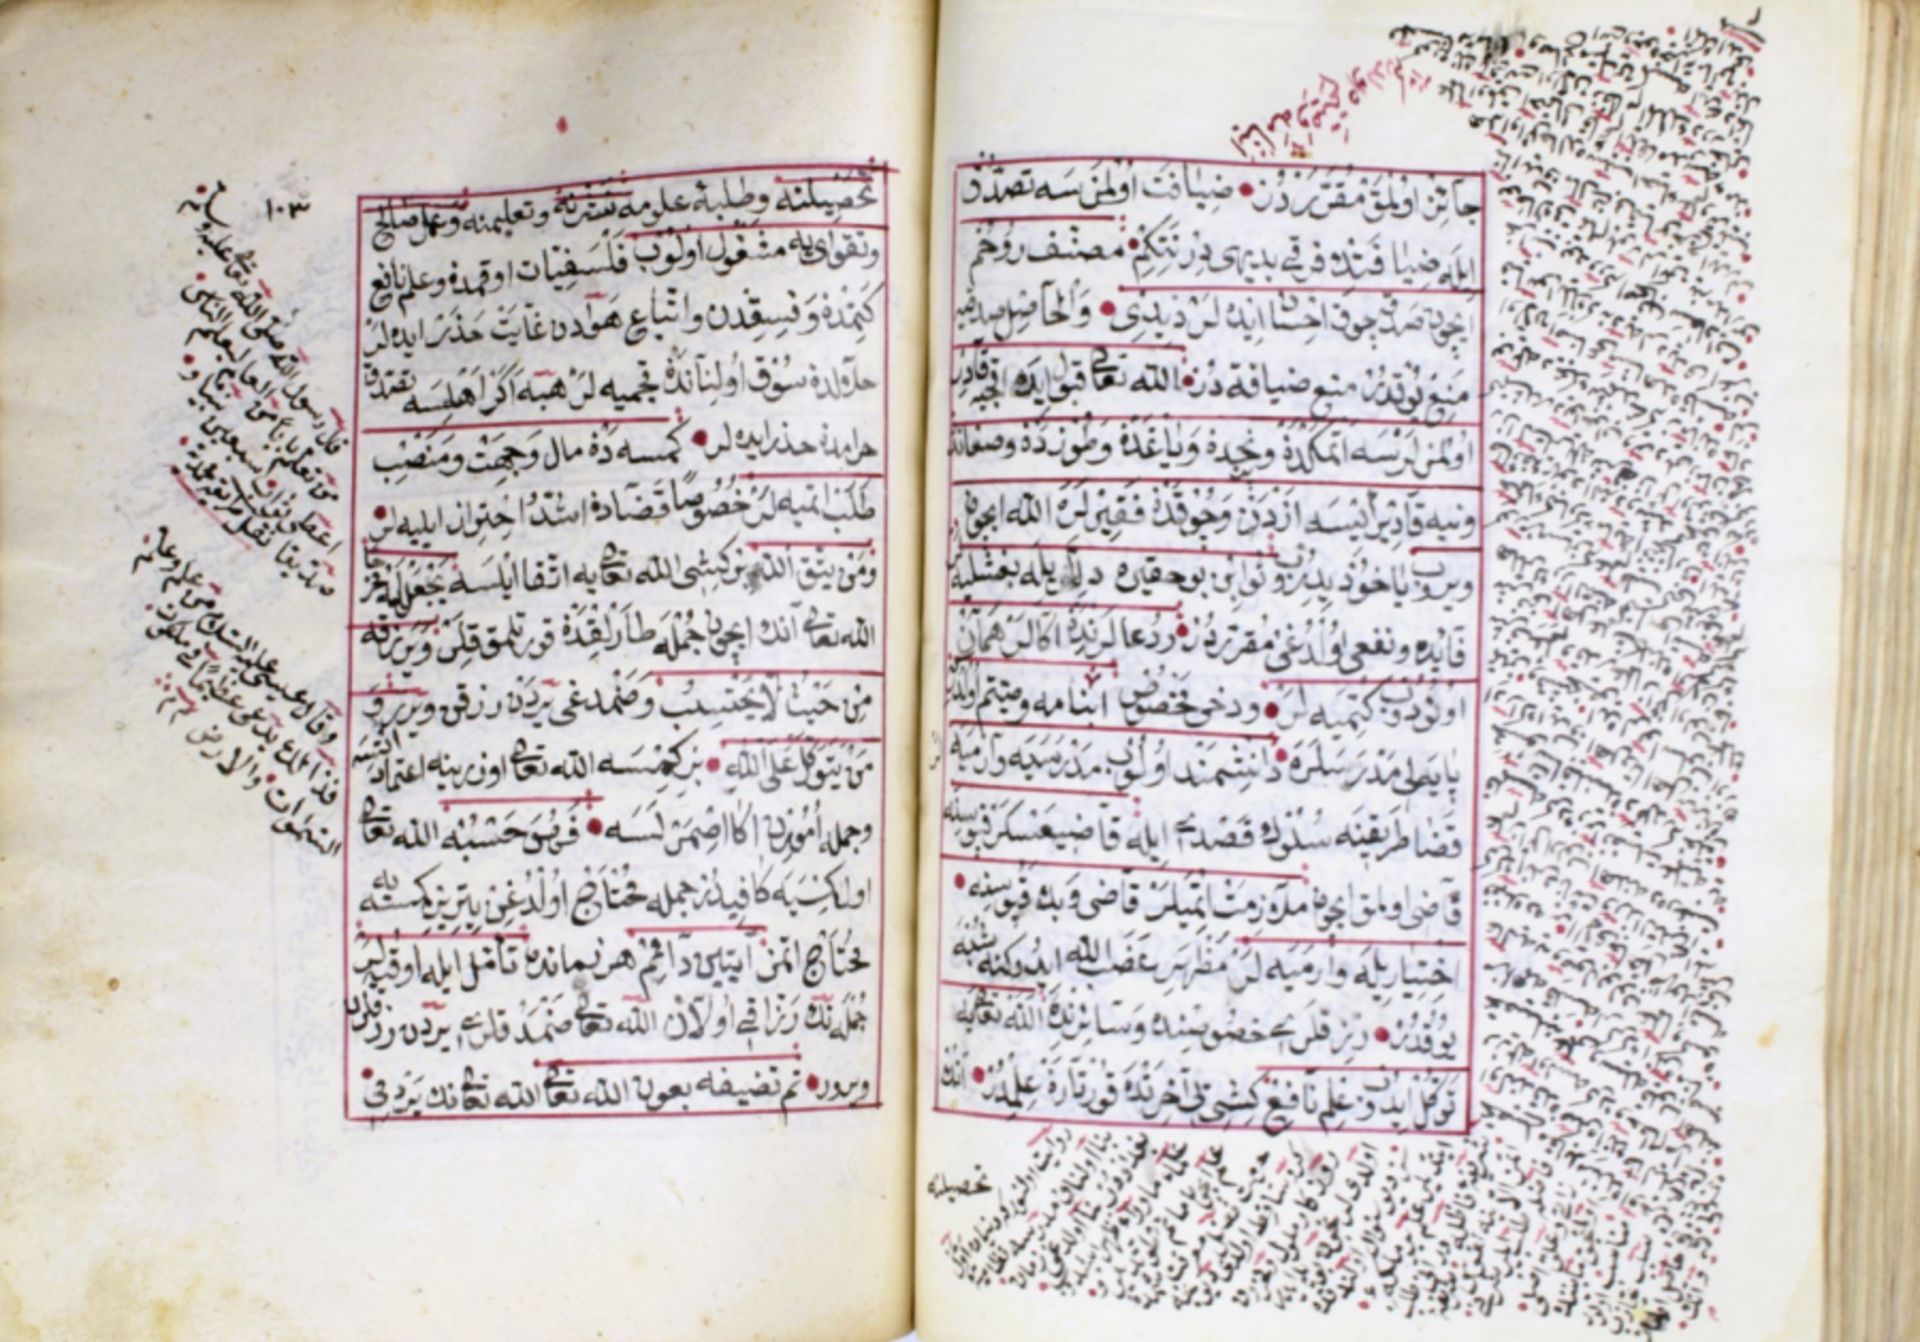 18/19th century treatise by Mohamed Al-Barkoui on the rules of Islam